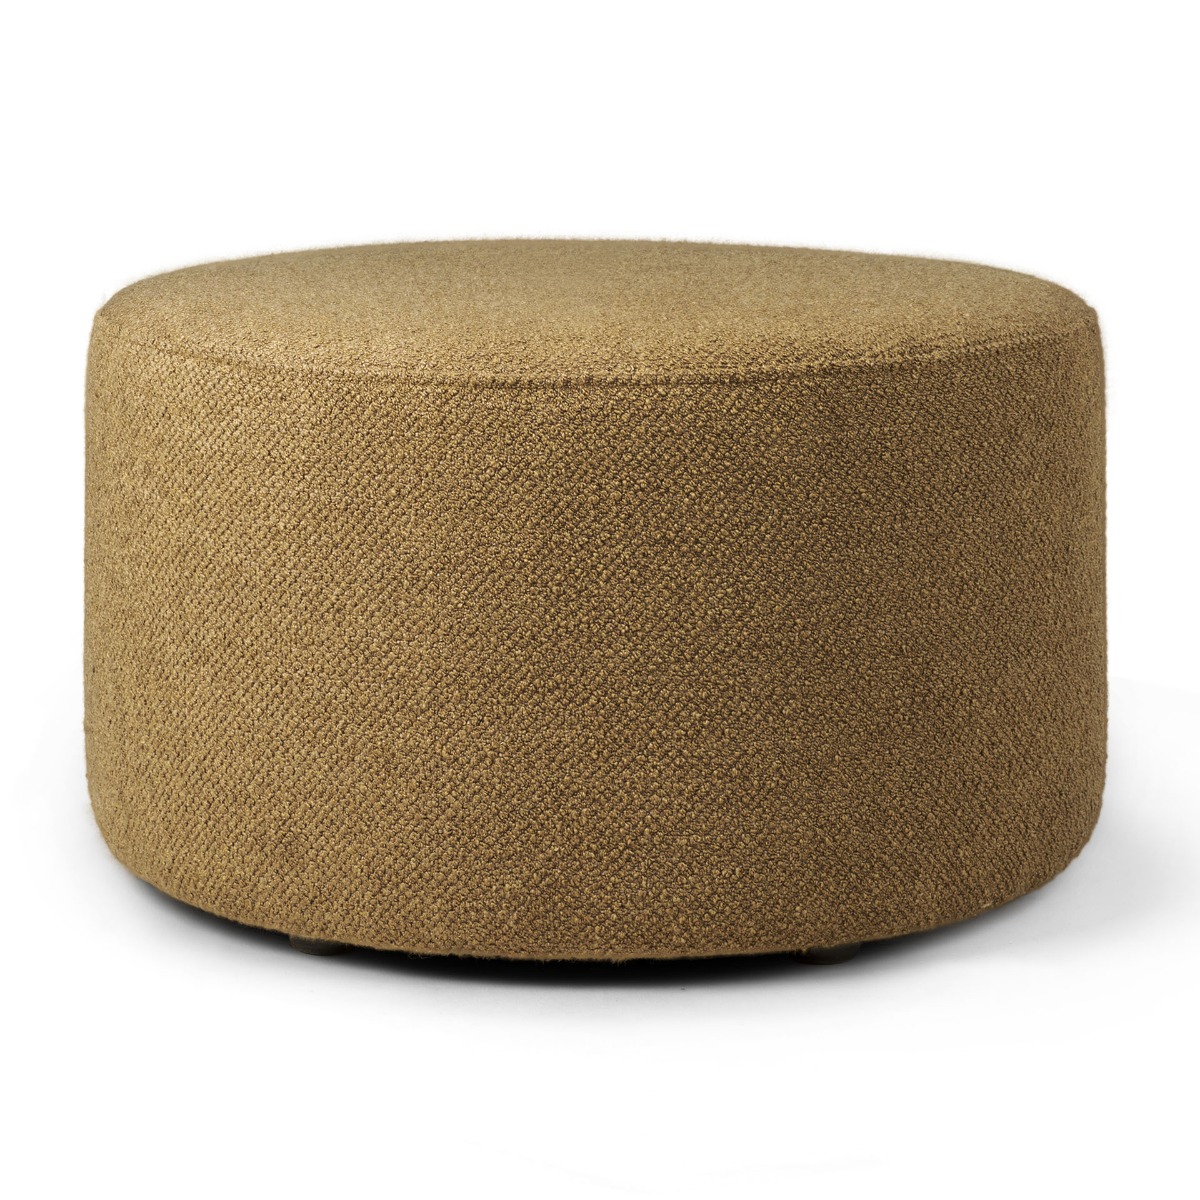 Barrow footstool Round in Ginger